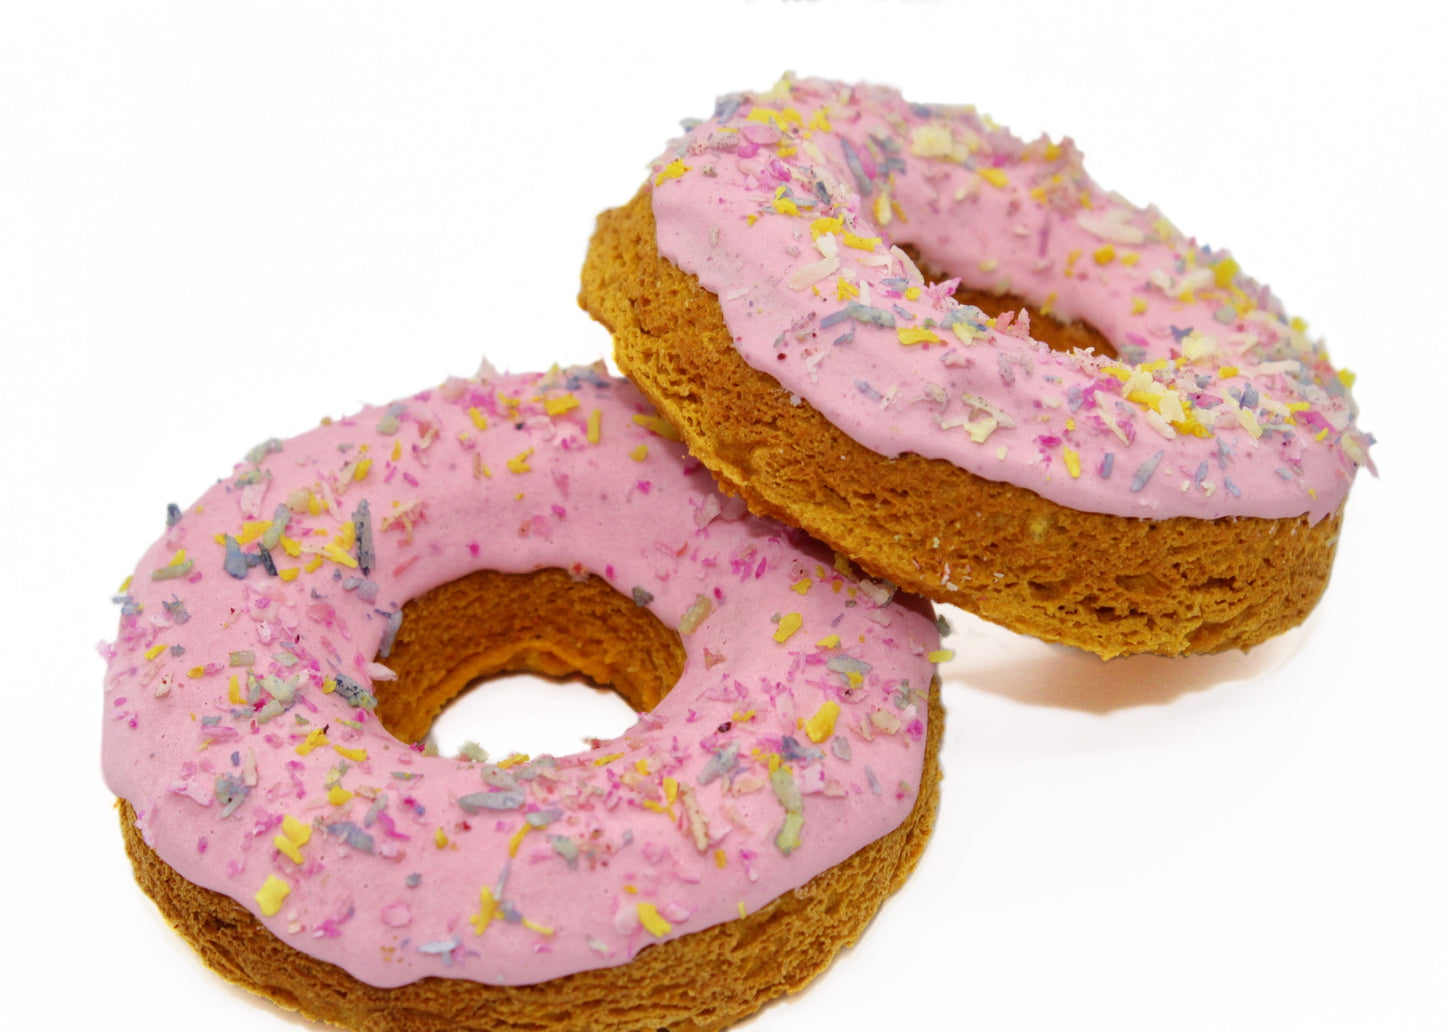 Two pumpkin flavored dog donuts both with pink frosting and  rainbow colored coconut flakes on top.